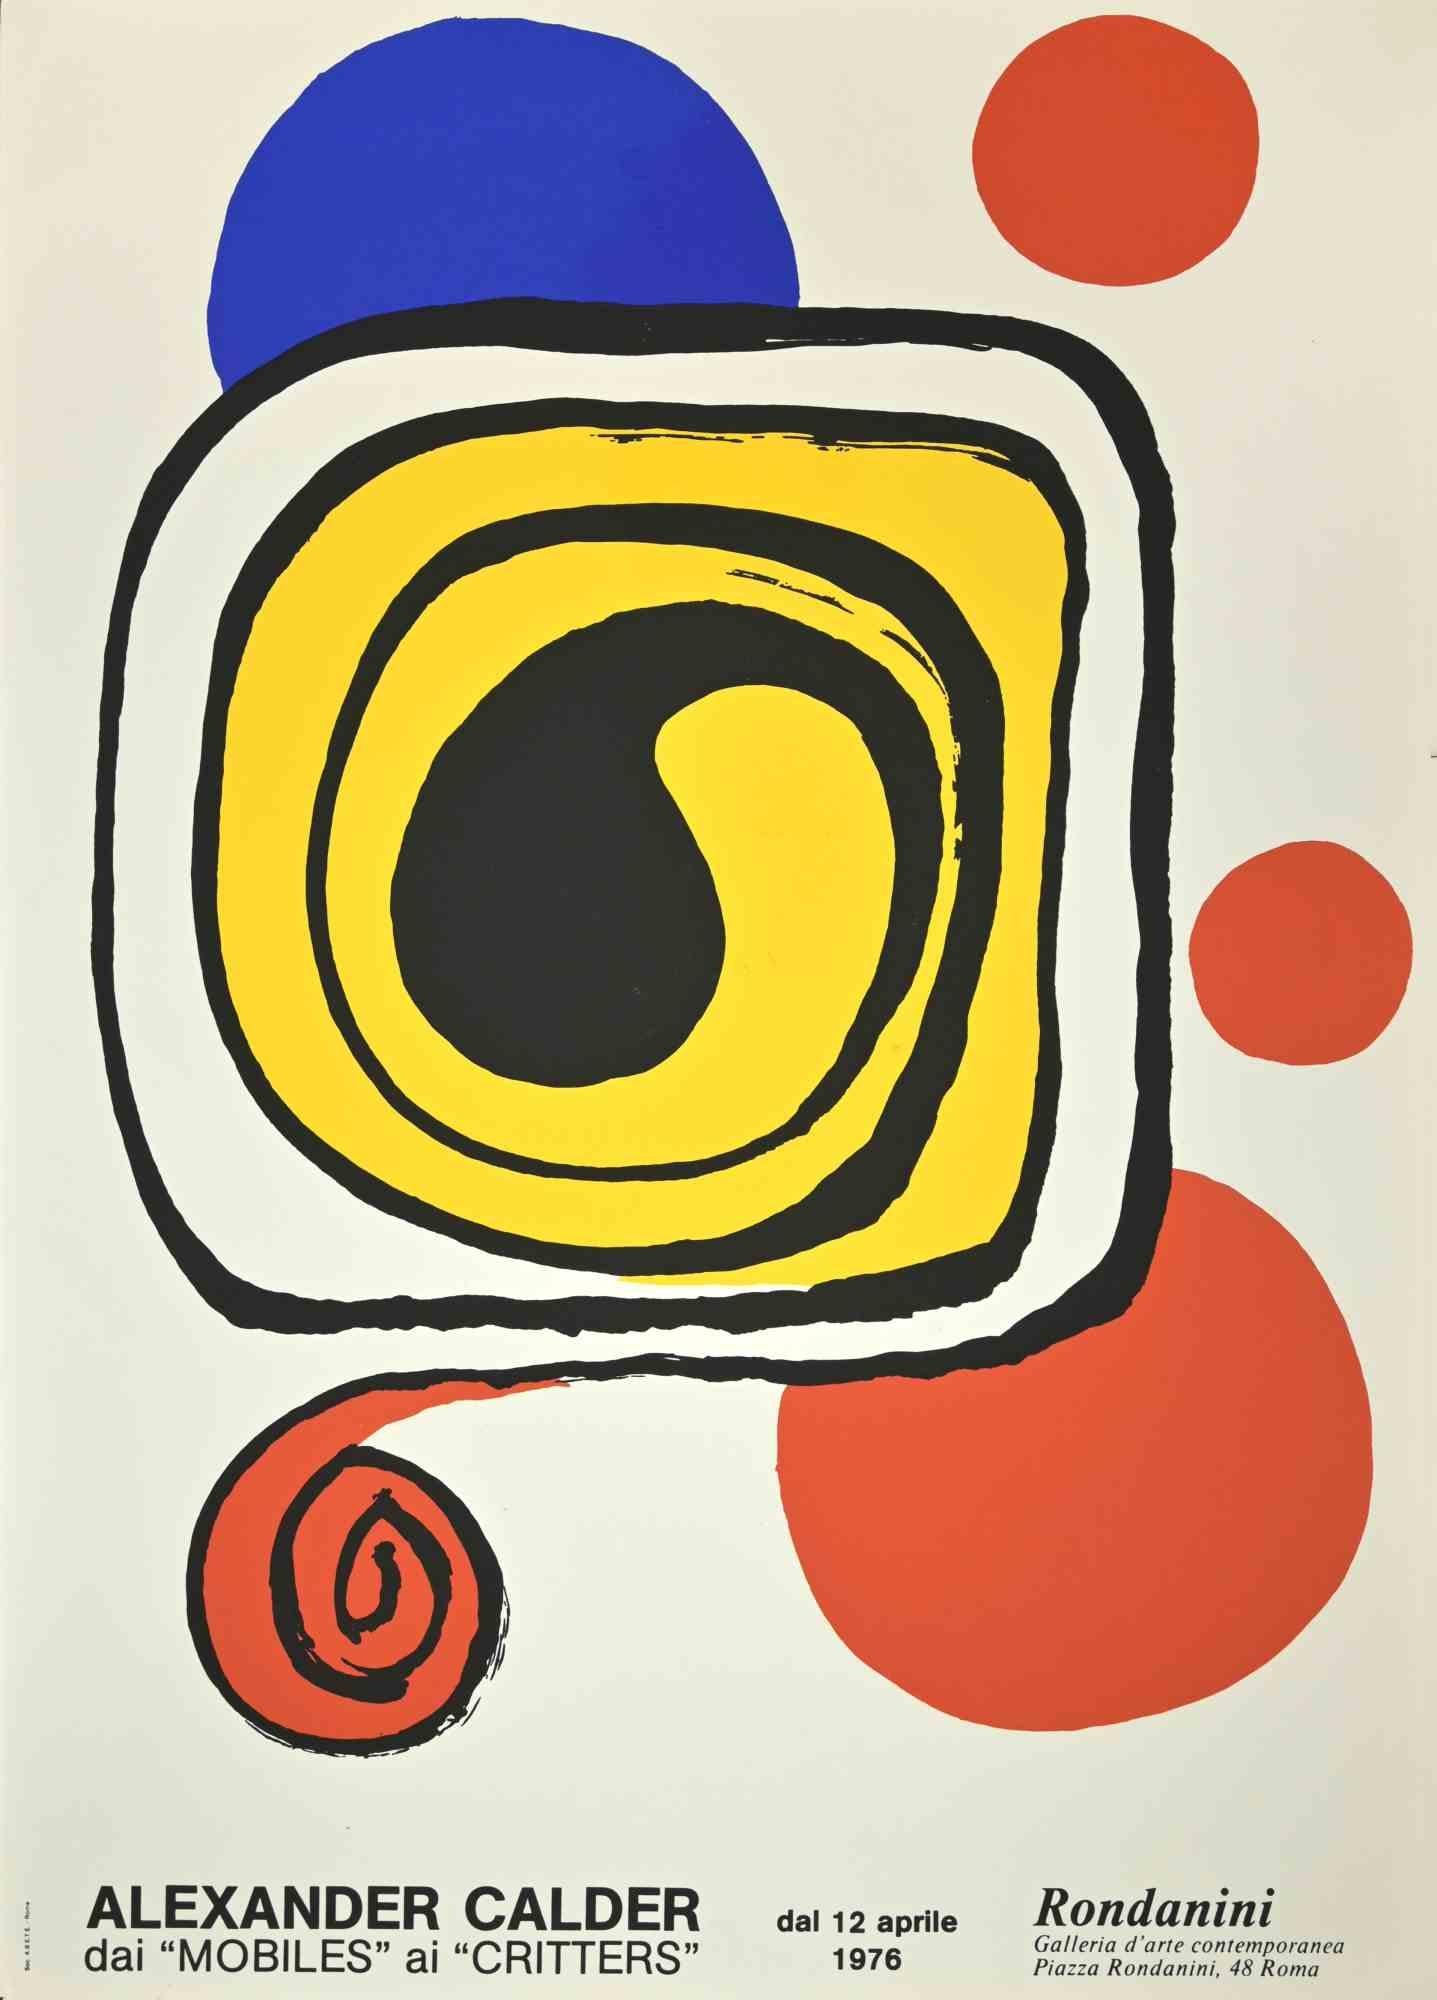 Unknown Abstract Print - Vintage Exhibition Poster - Lithograph by A. Calder - 1976